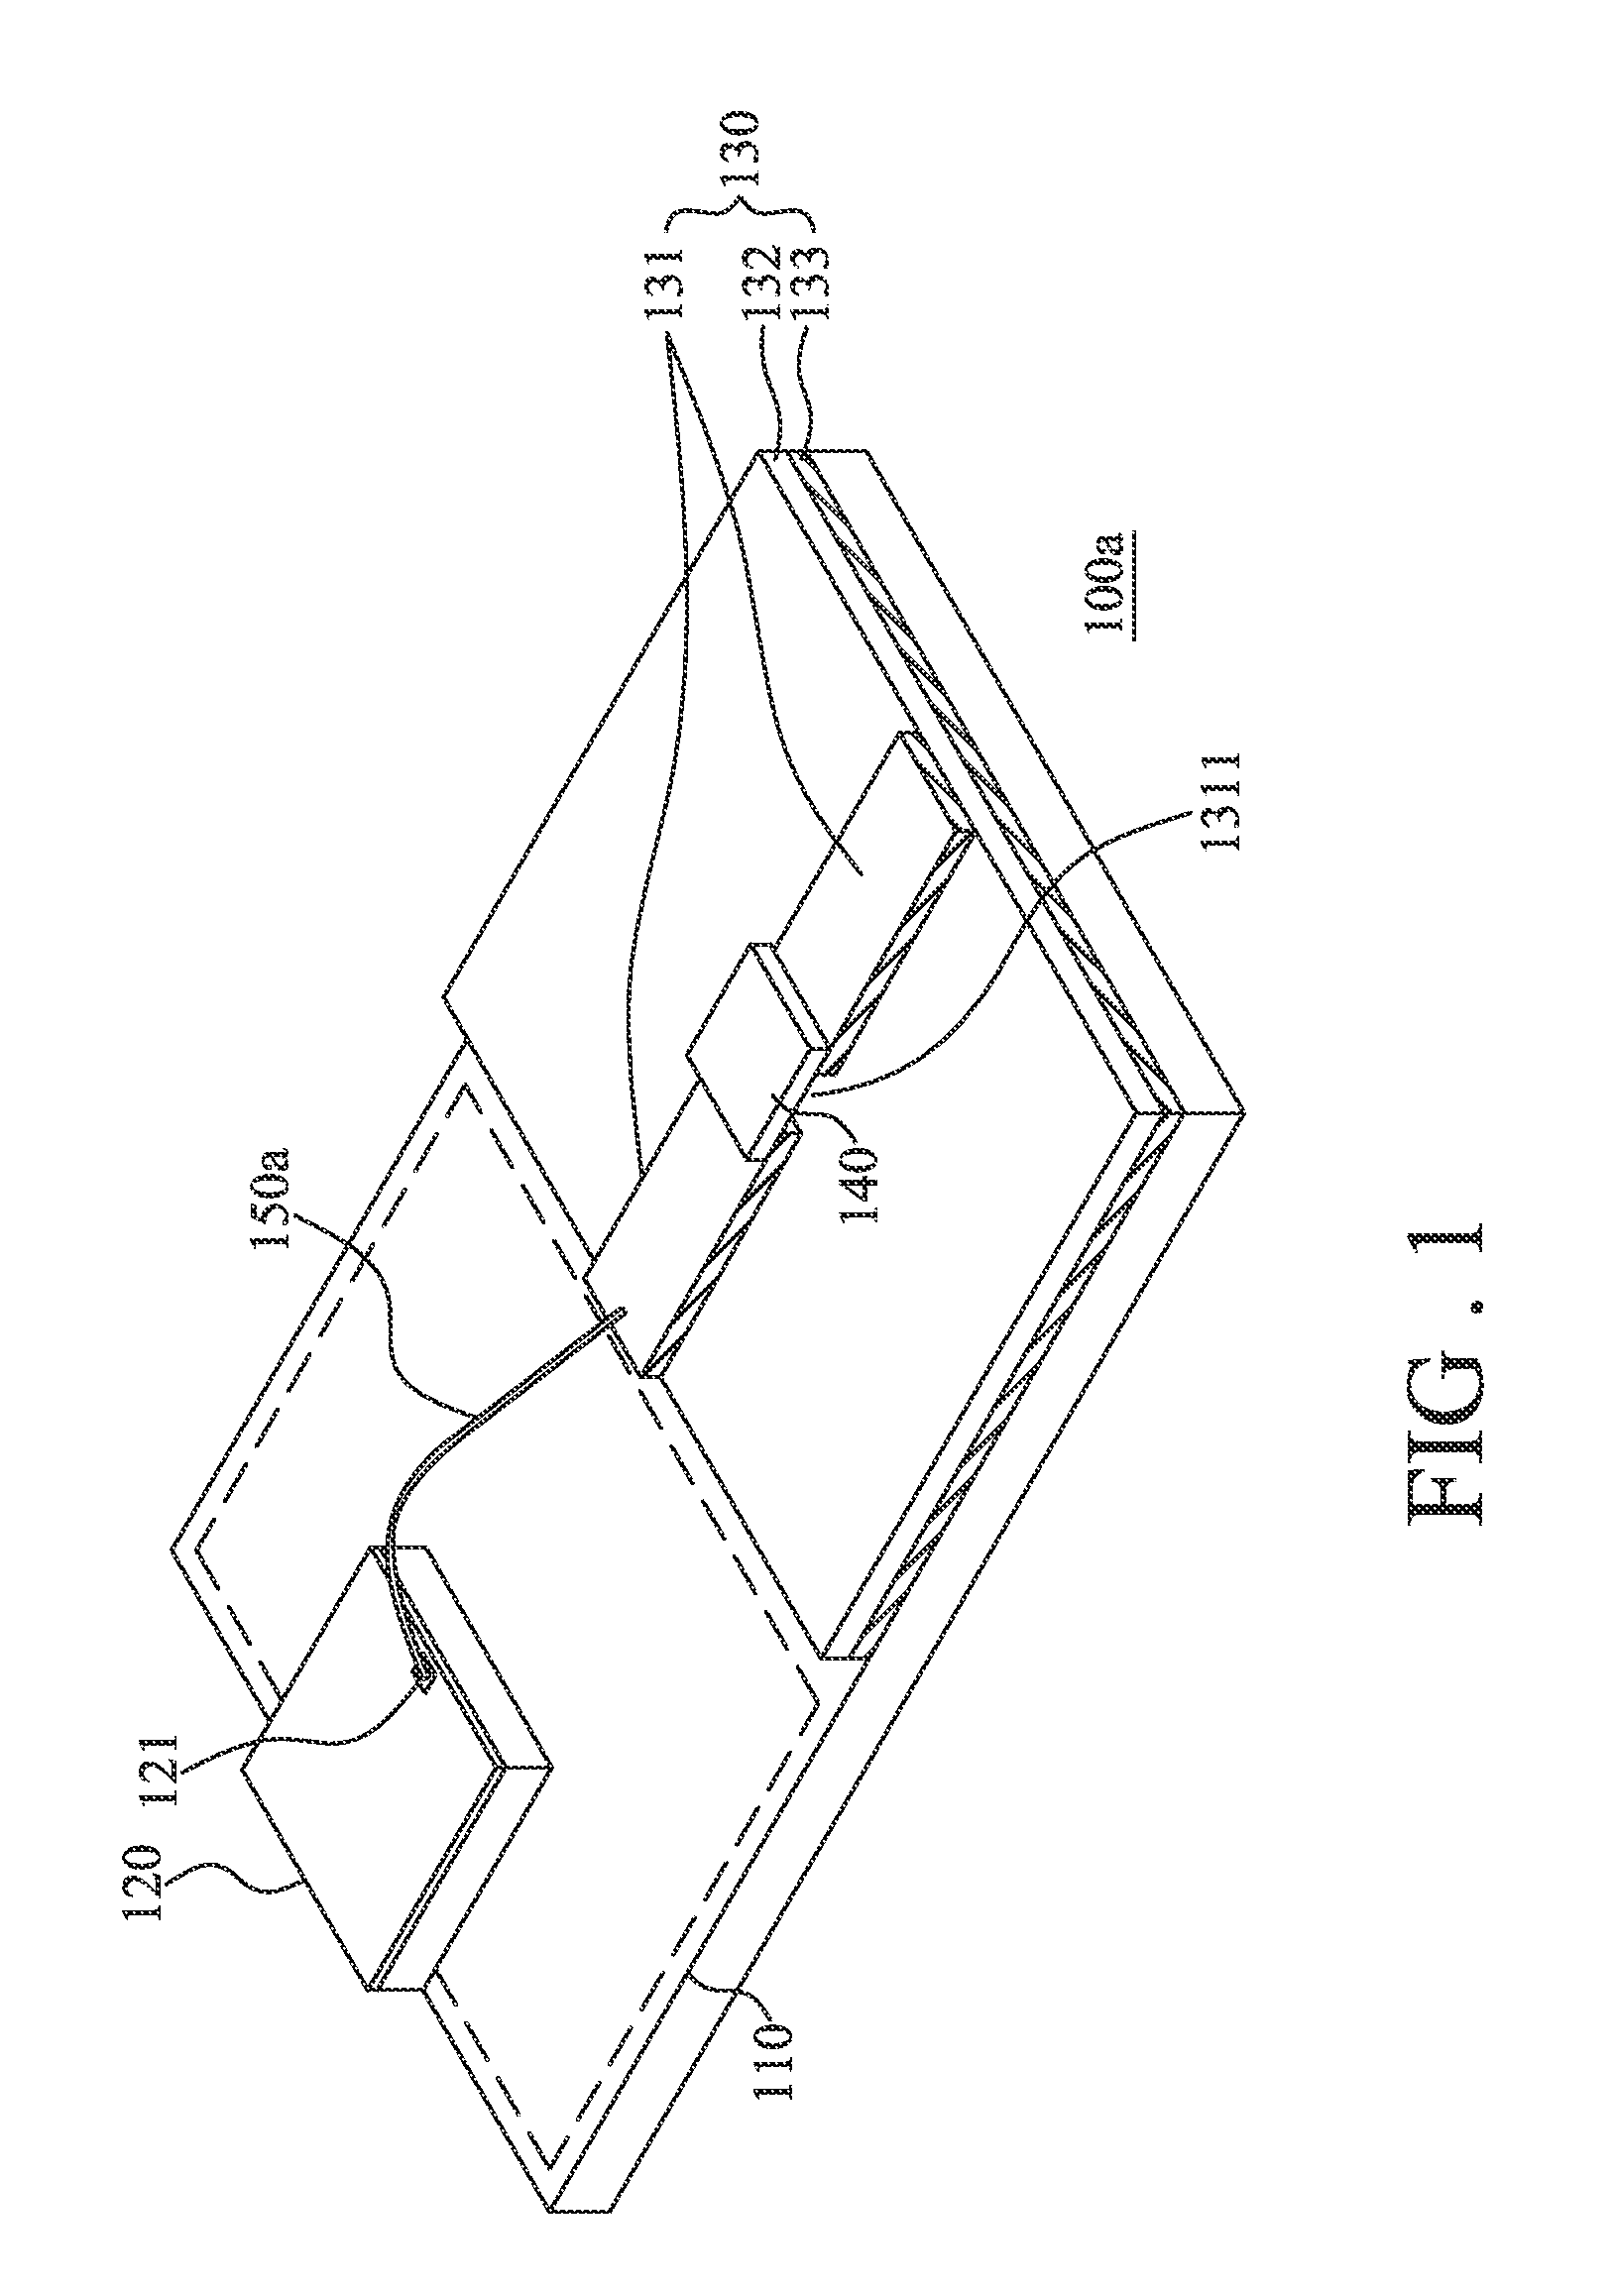 Capacitive bonding structure for electronic devices